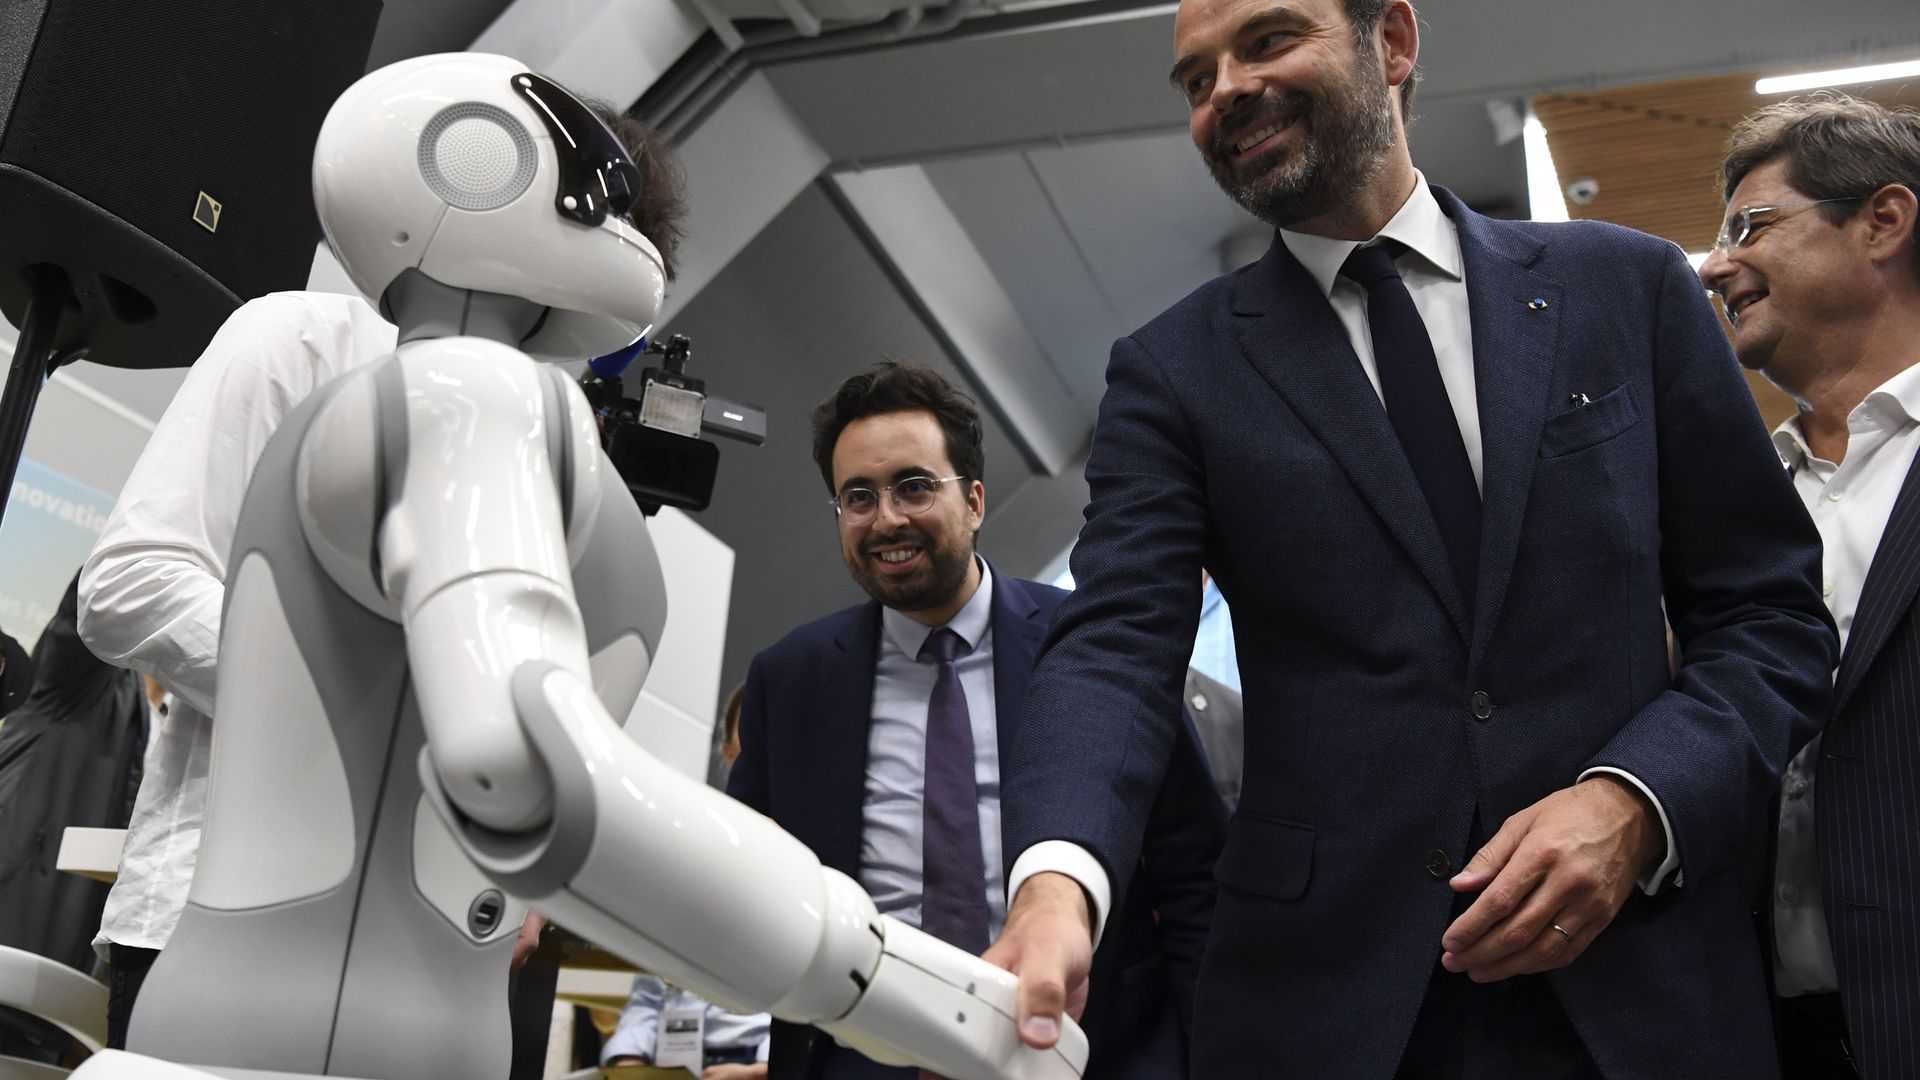 Photo of a man shaking hands with a robot